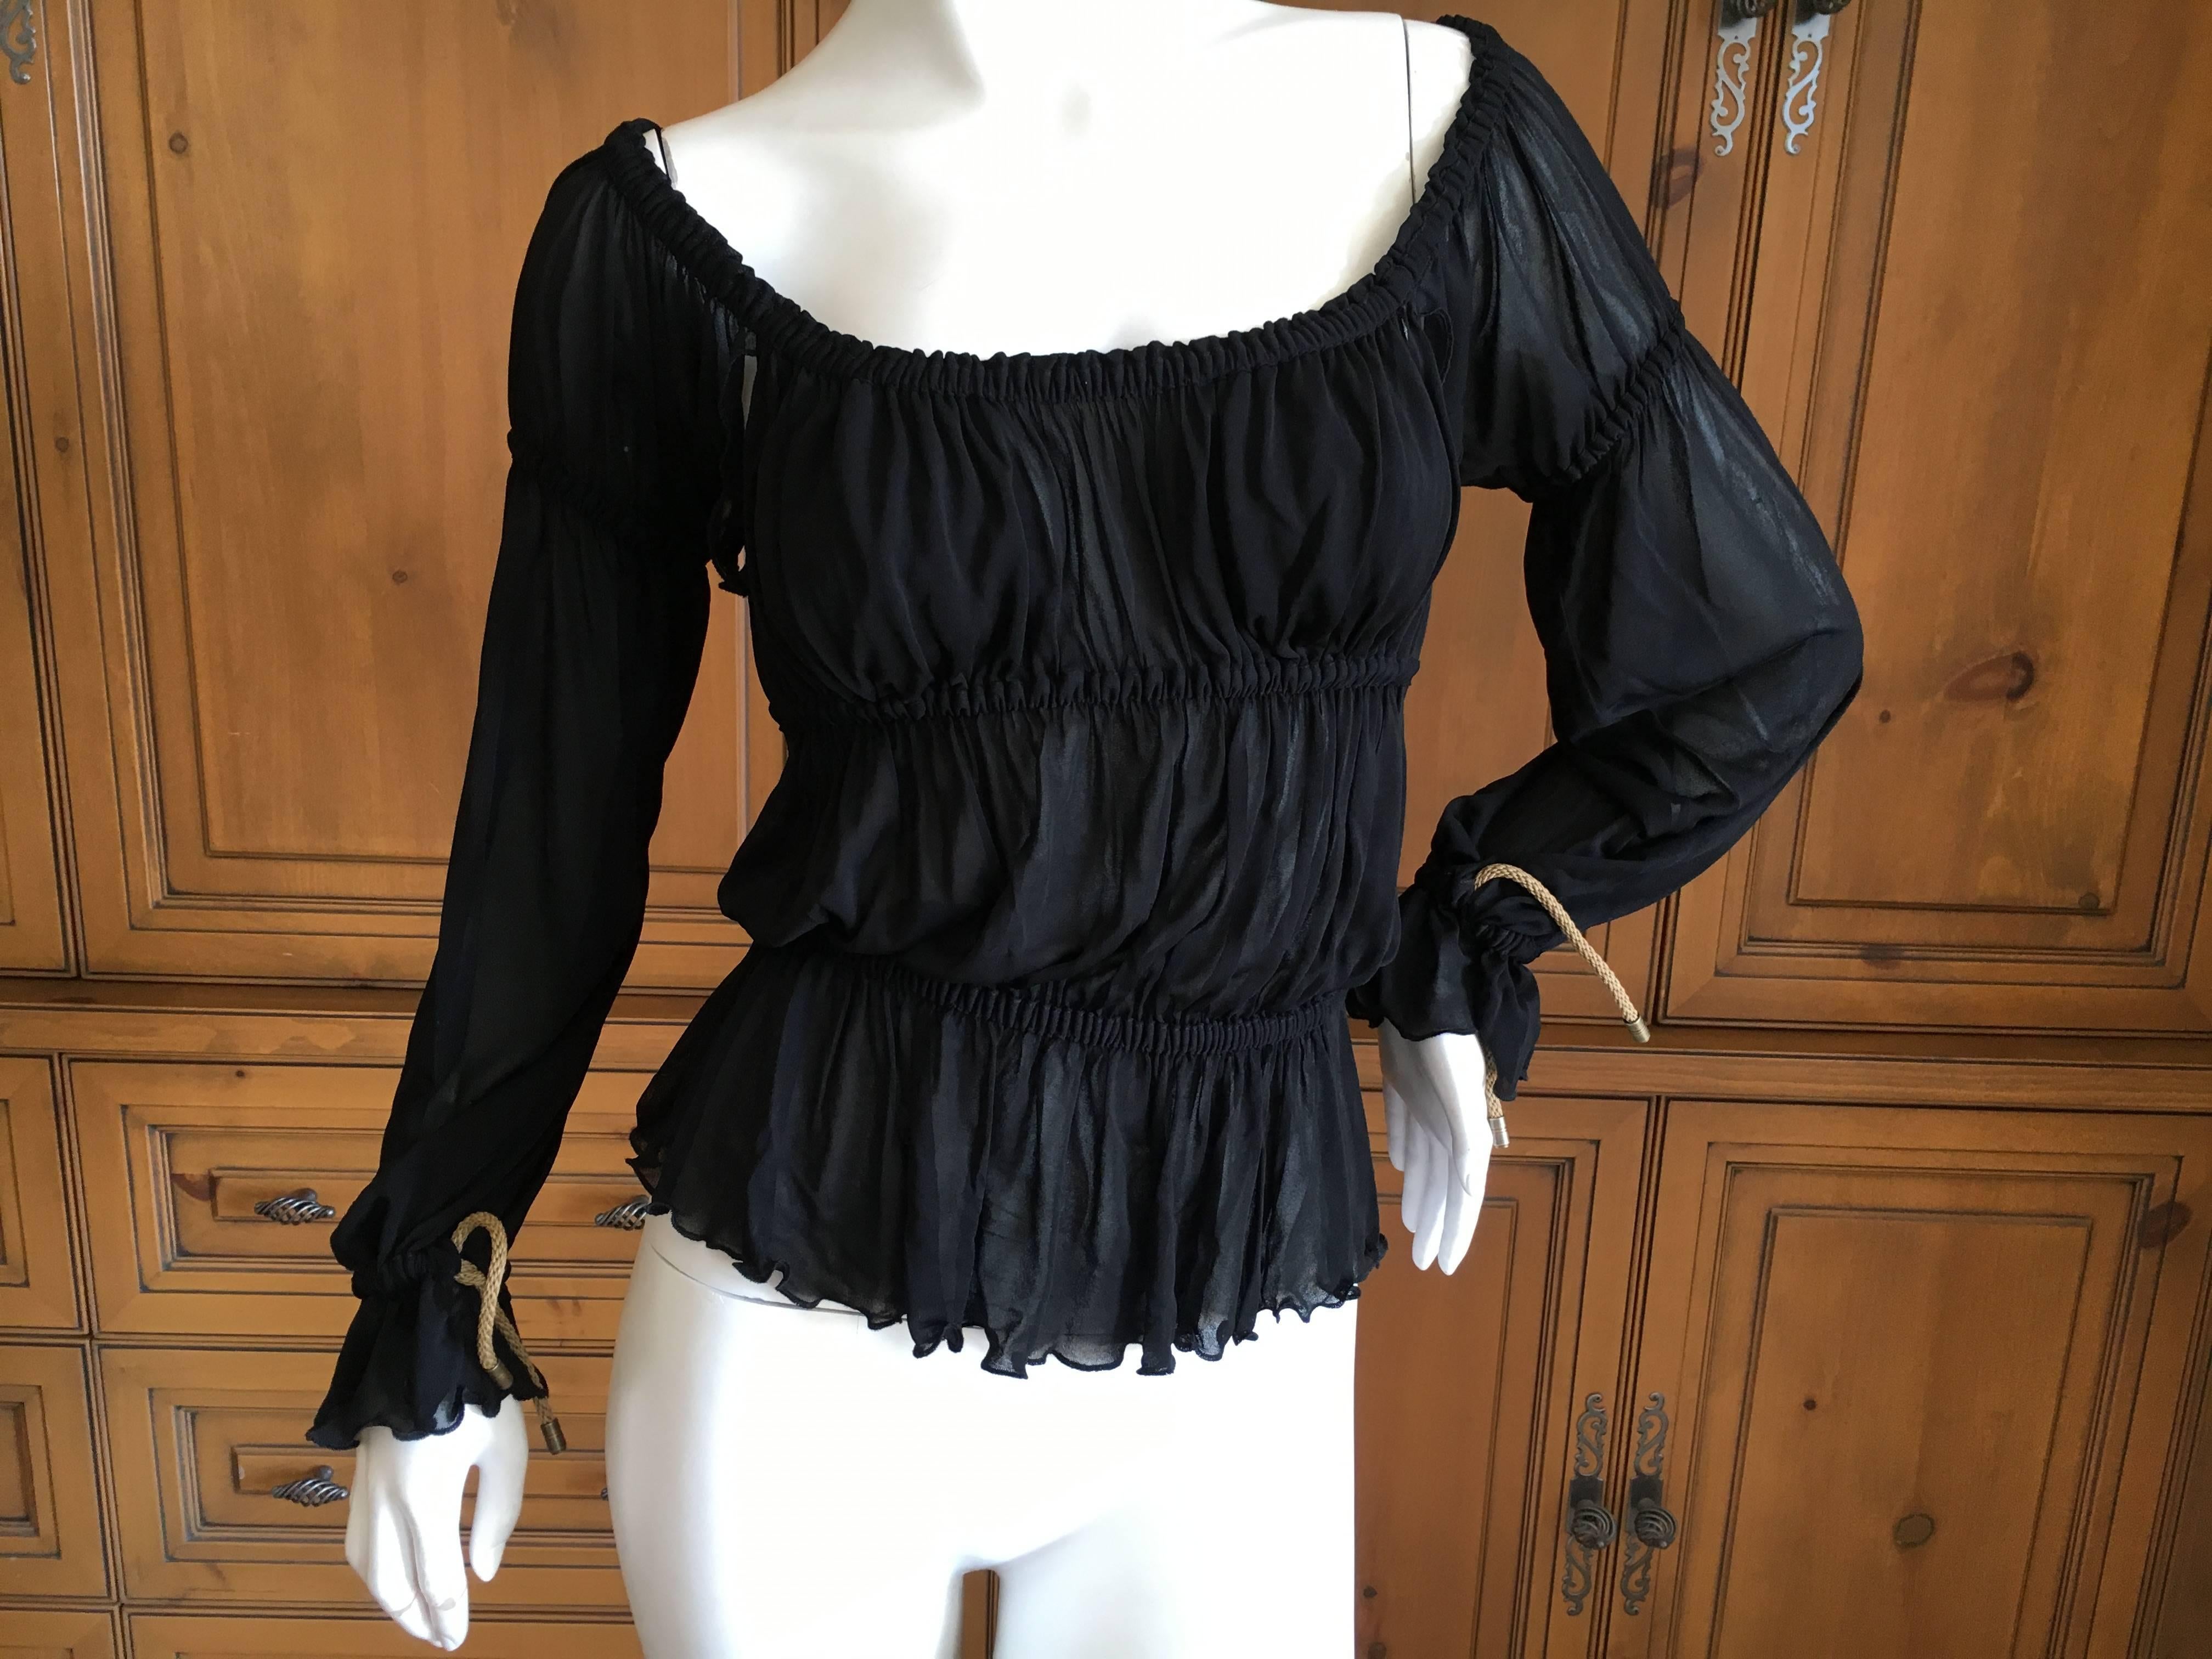 Yves Saint Laurent by Tom Ford Romantic Black Top For Sale 5